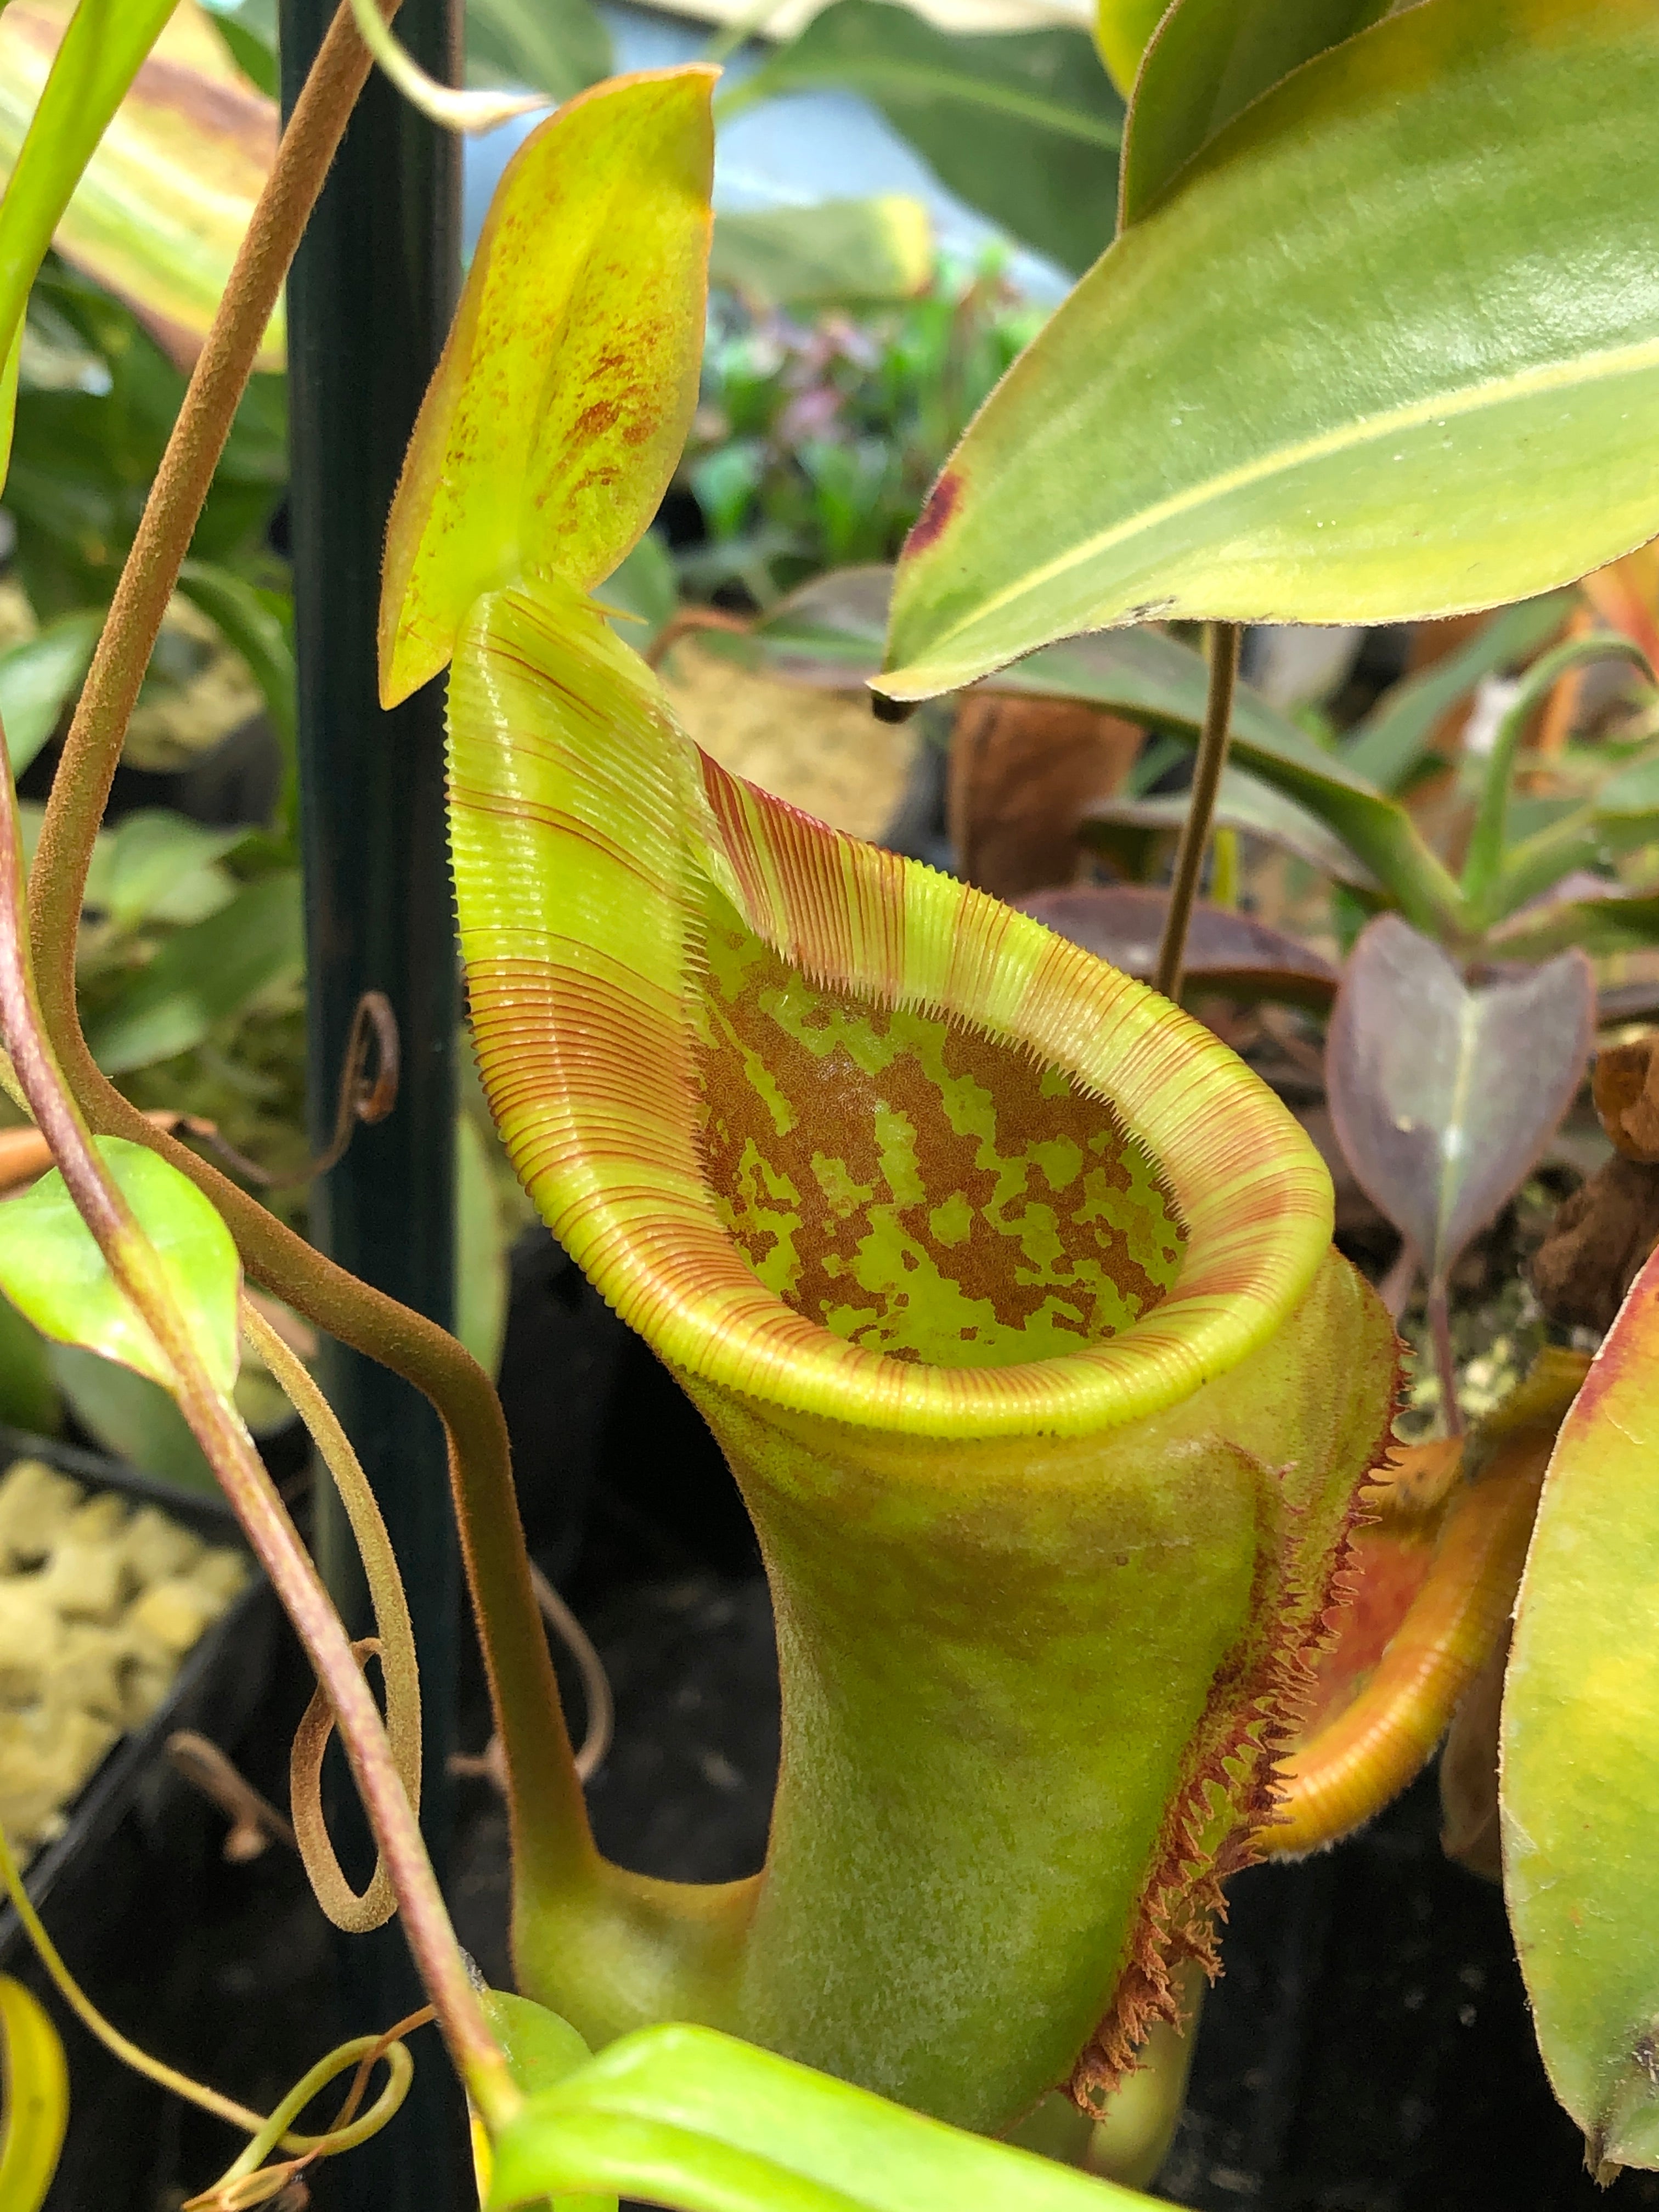 Nepenthes flava x (mira x lowii) Seed Grown